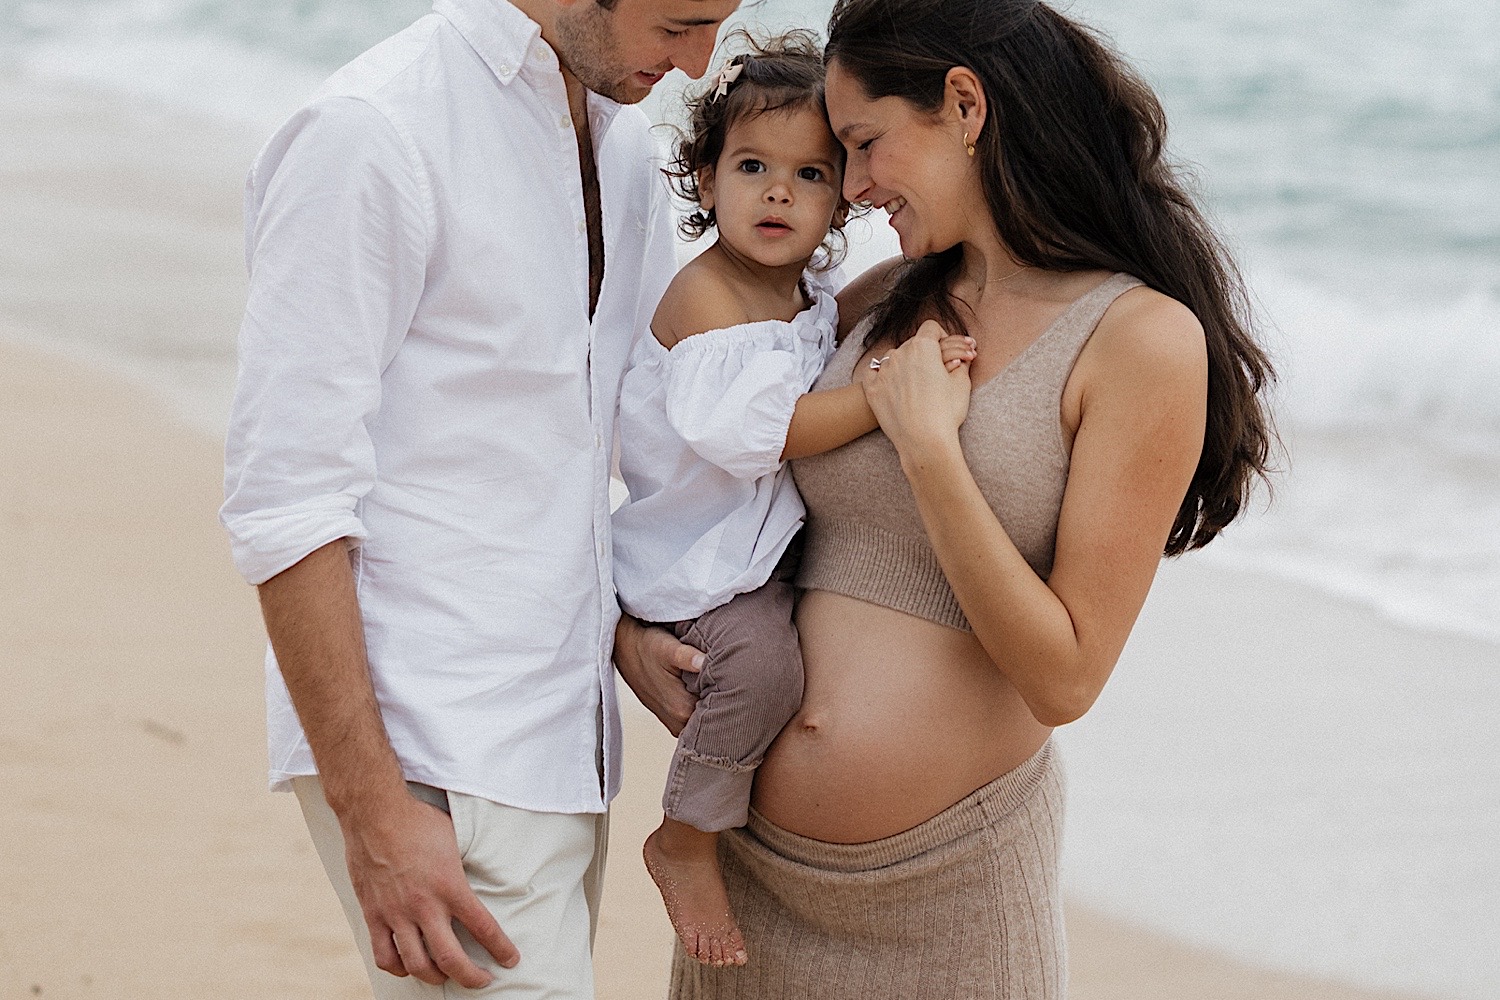 A child looks at the camera while being held between her pregnant mother and father on the beach, photo taken by a Hawaii maternity photographer